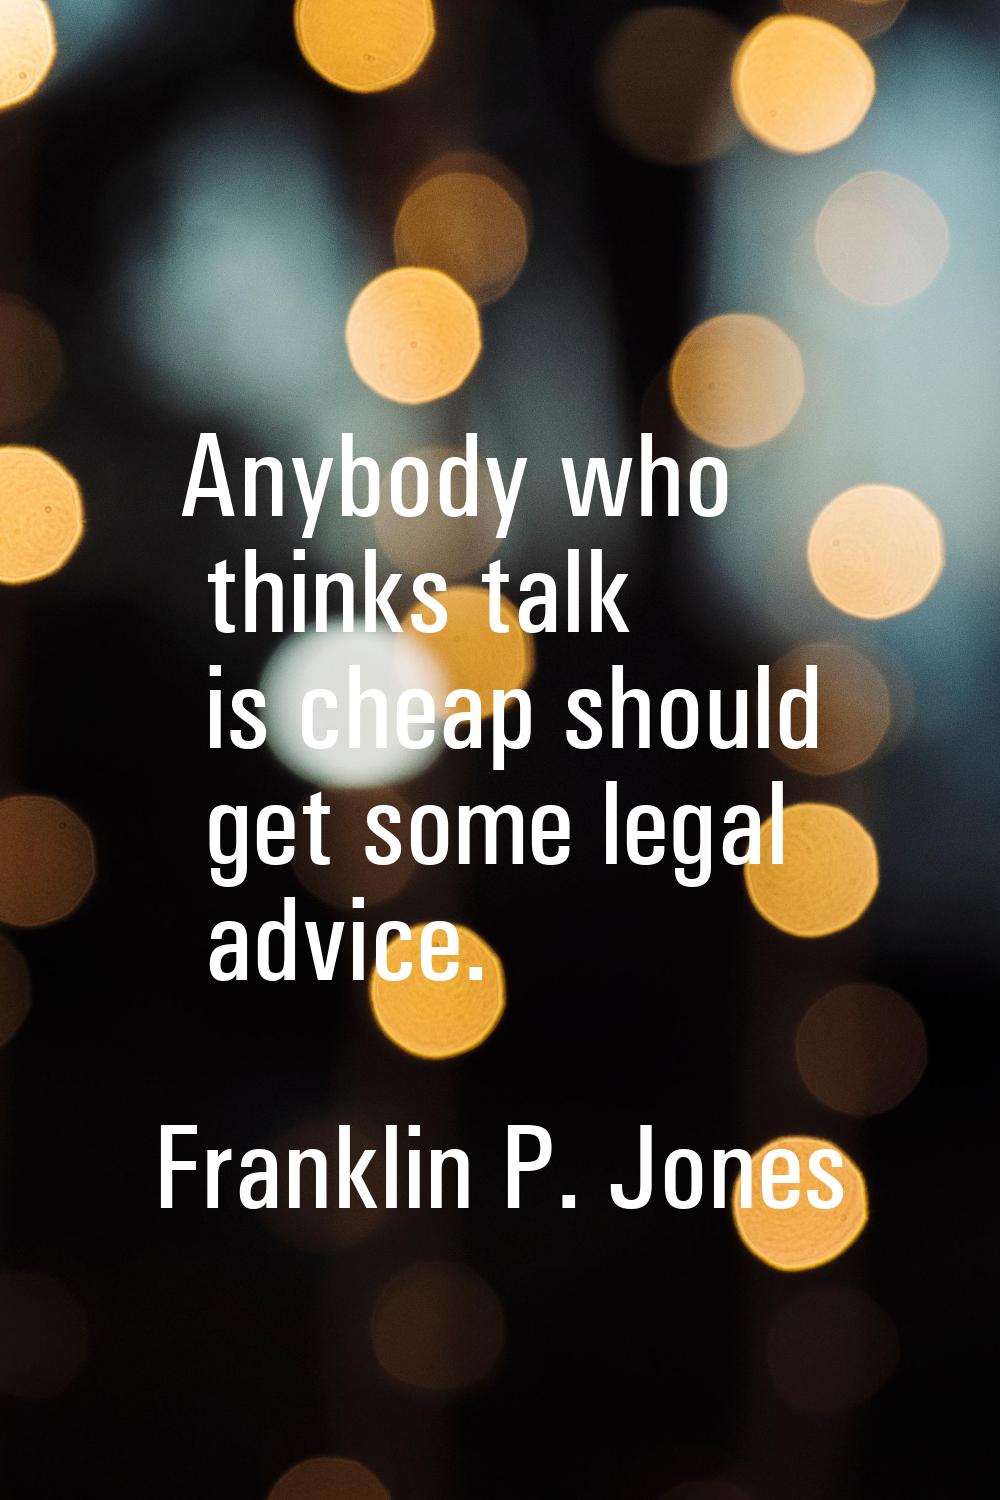 Anybody who thinks talk is cheap should get some legal advice.